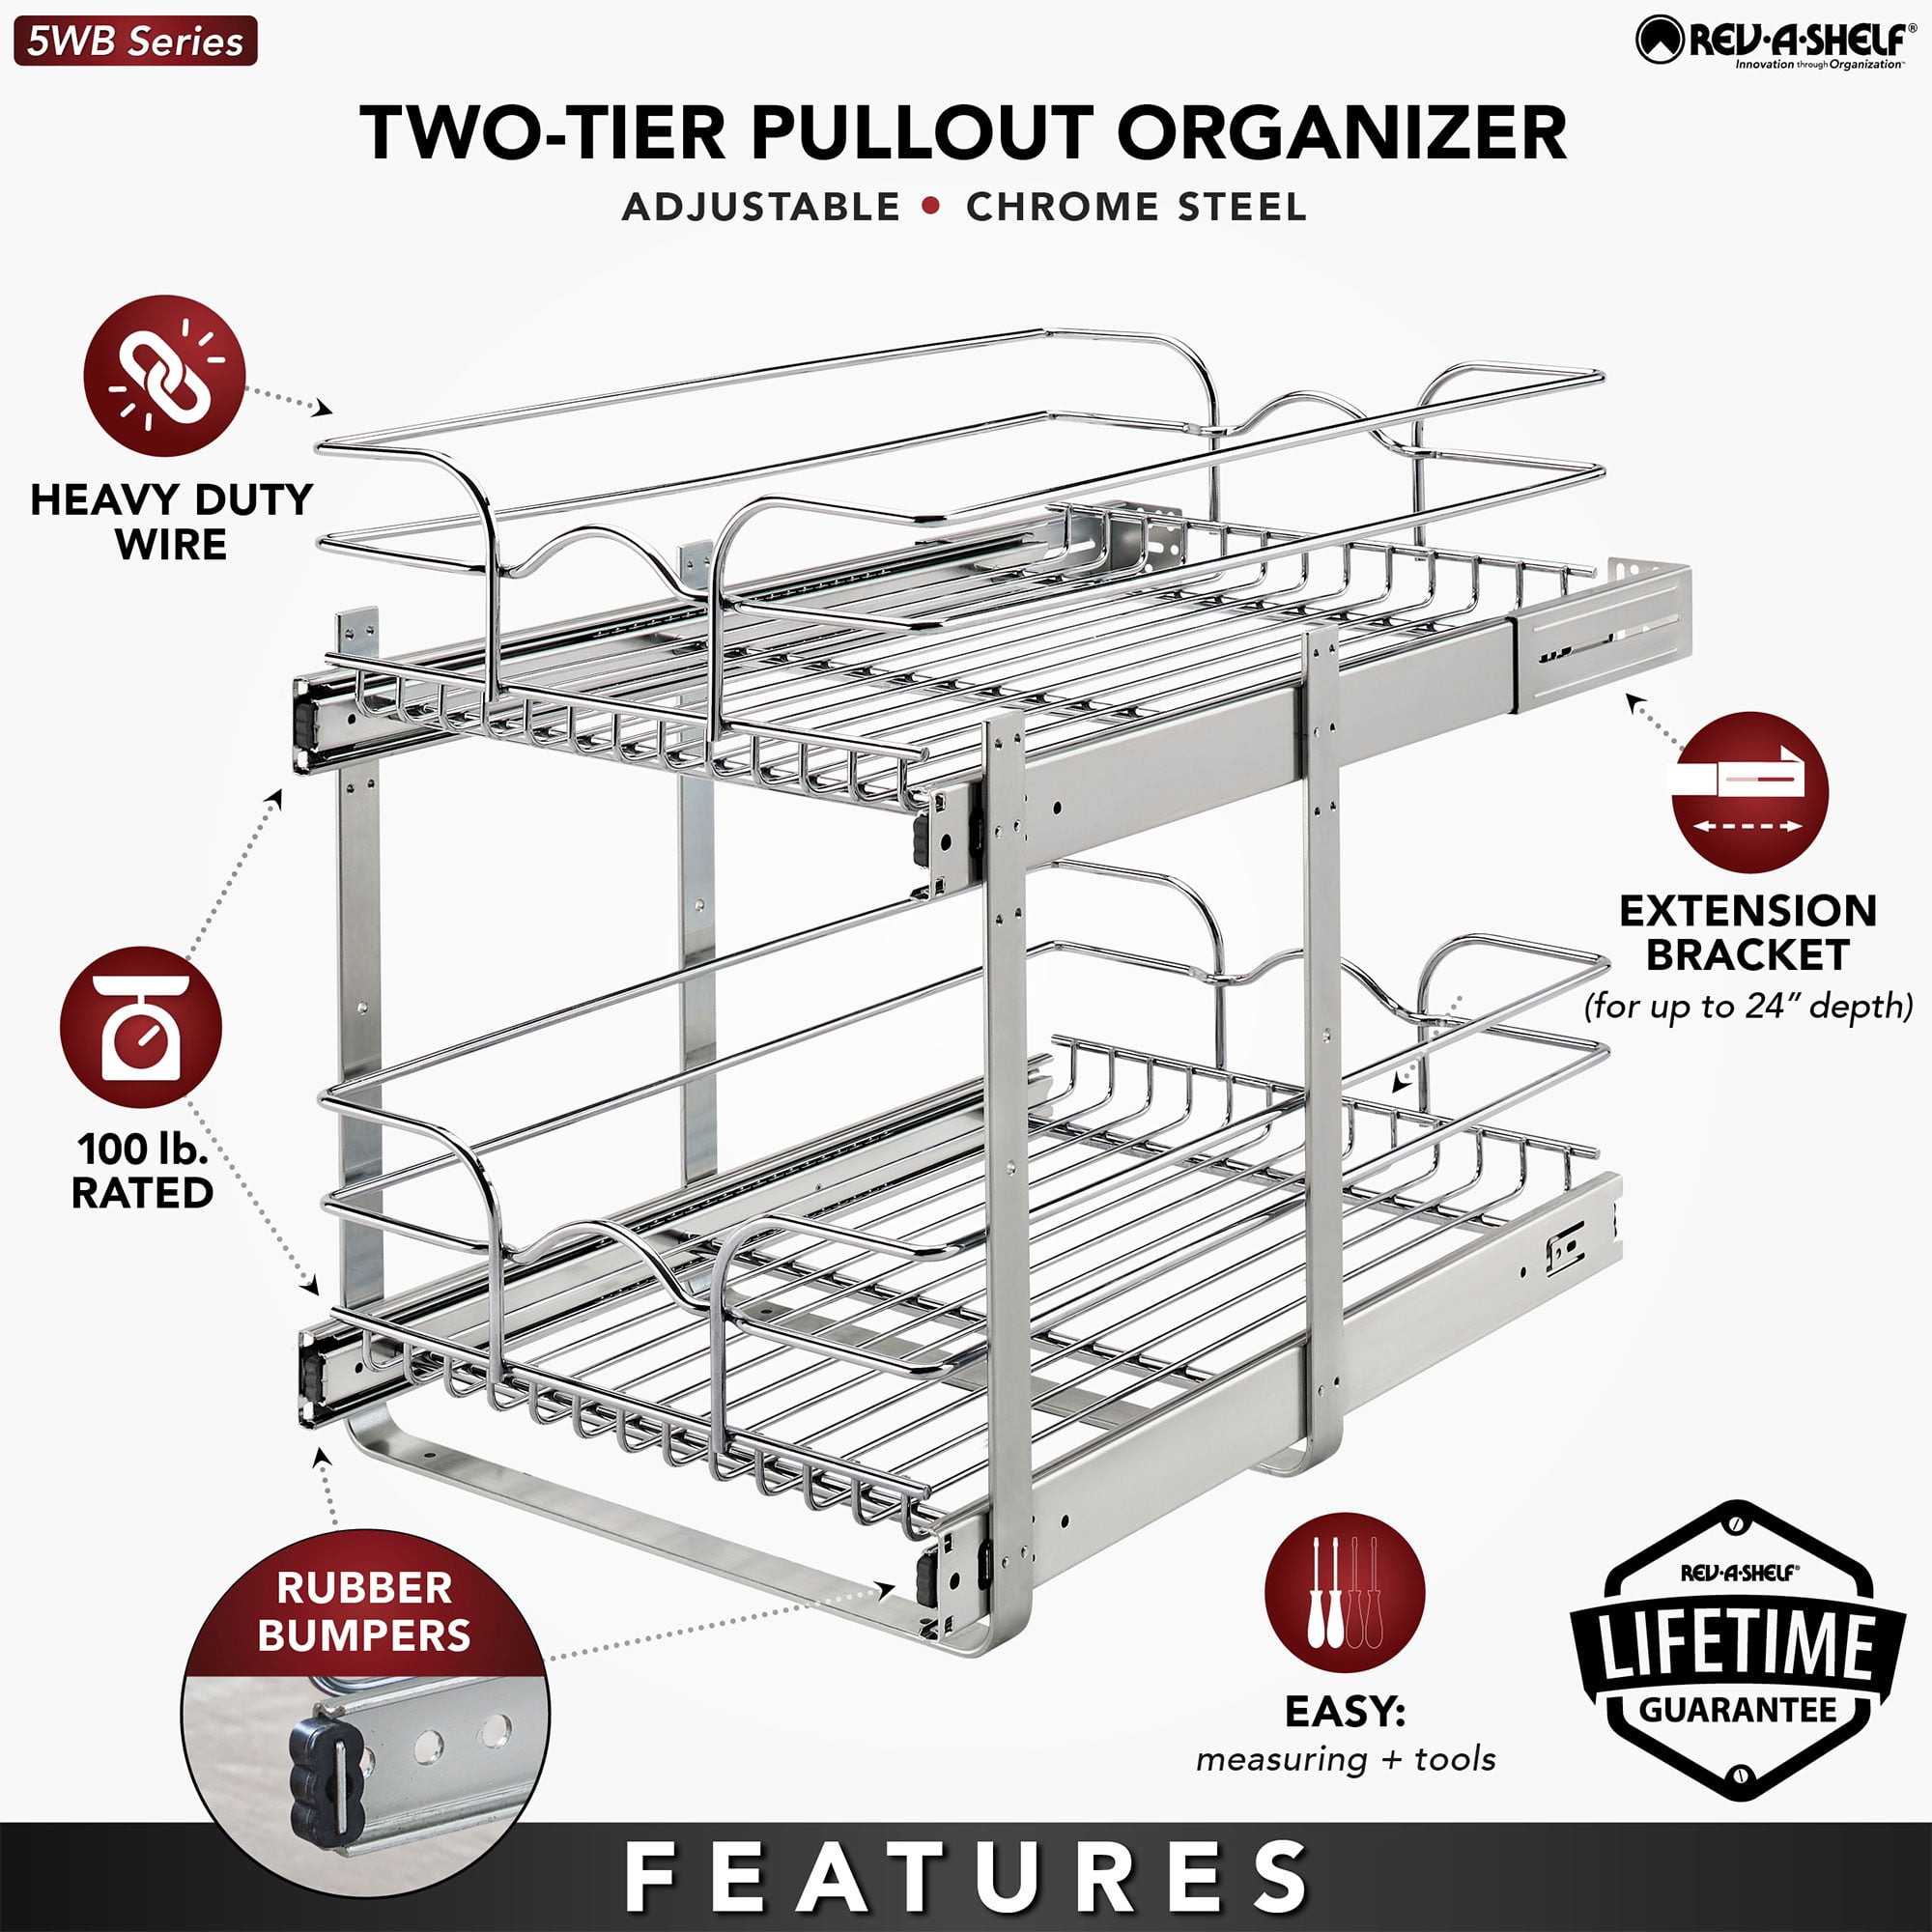 Simply Put 20.5-in W x 14.6875-in H 2-Tier Cabinet-mount Metal